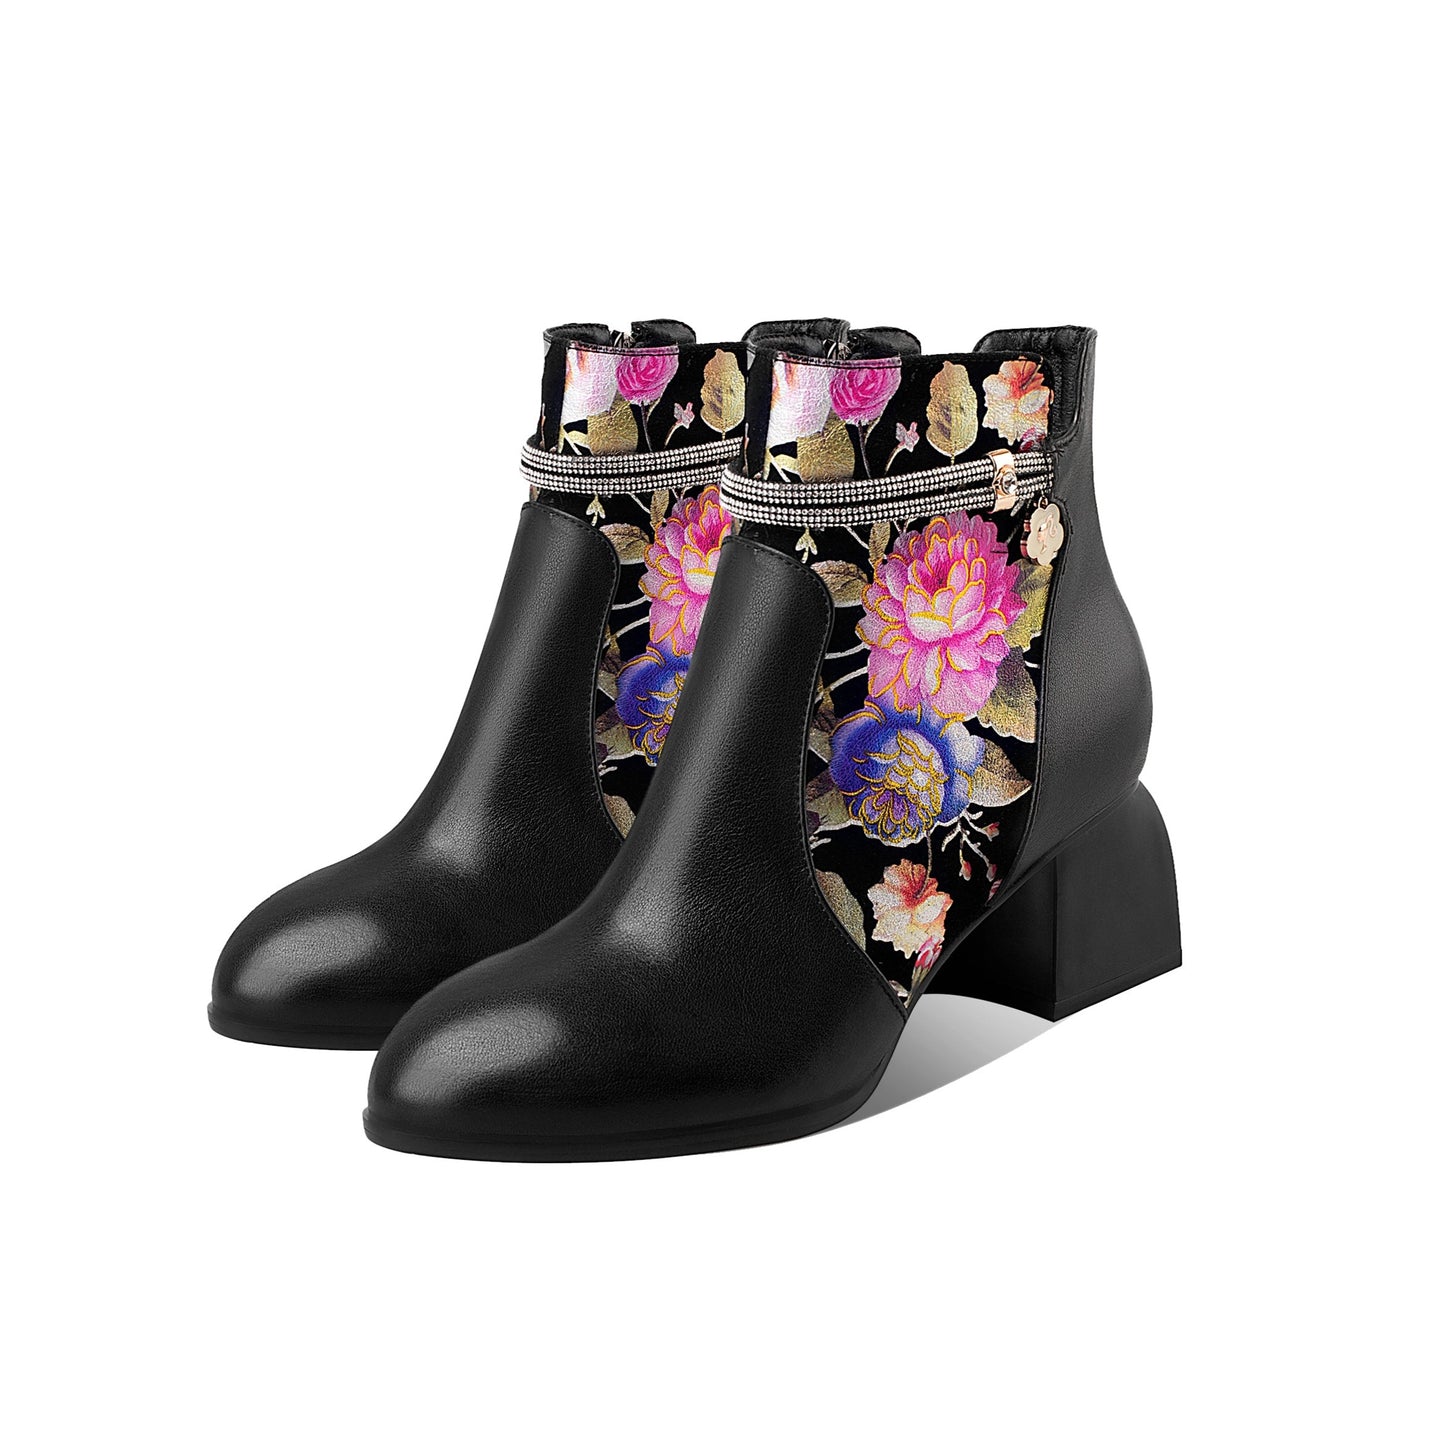 TinaCus Handmade Women's Genuine Leather Ethnic Printed Floral Pointed Toe Mid Chunky Heel Side Zipper Ankle Boots Shoes